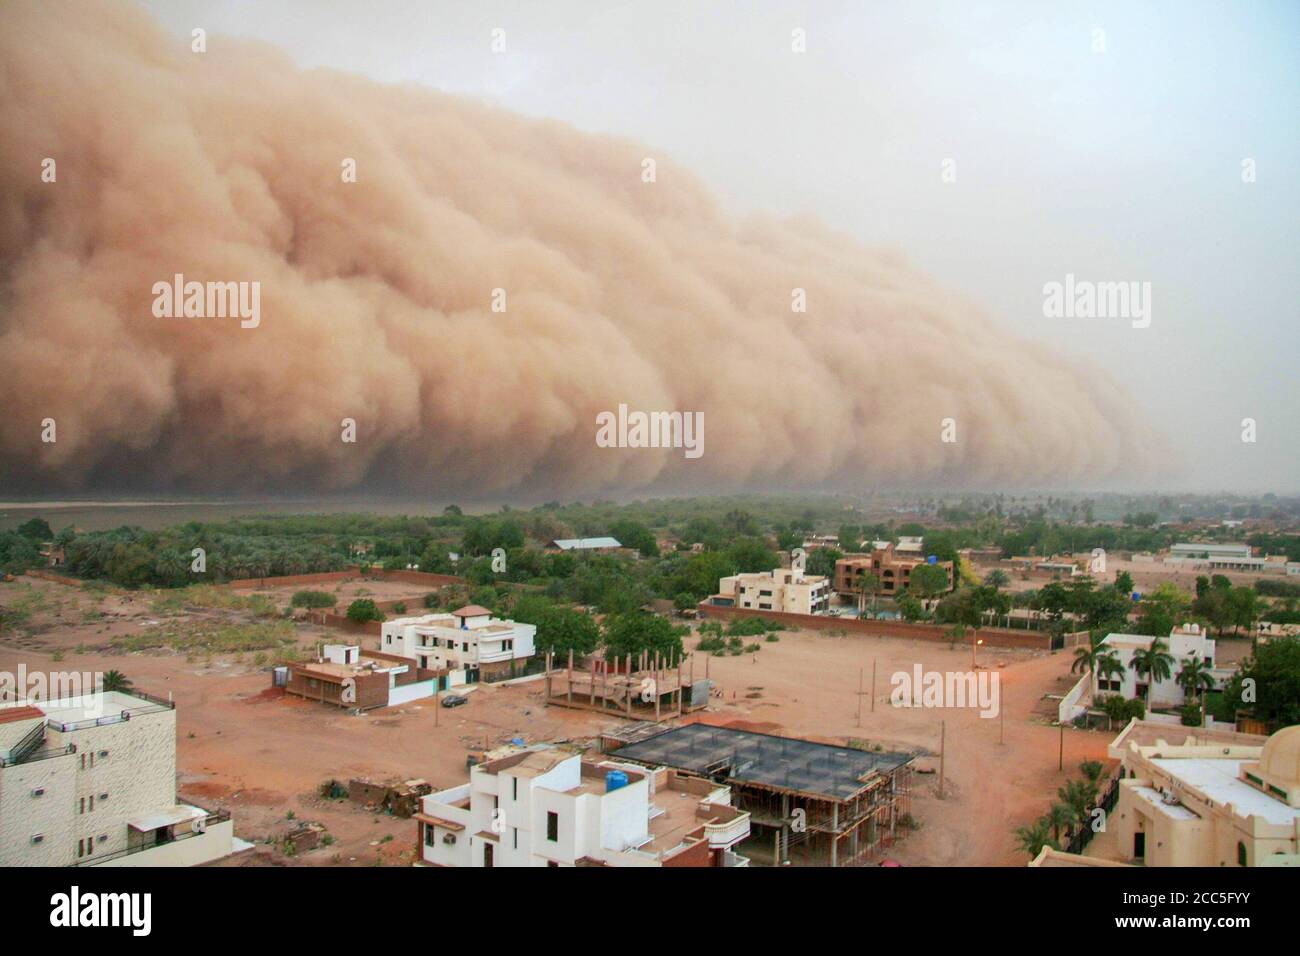 A haboob approaching the outskirts of Khartoum, Sudan. A haboob is a type of intense dust storm carried on wind that occur regularly in Sudan. Stock Photo